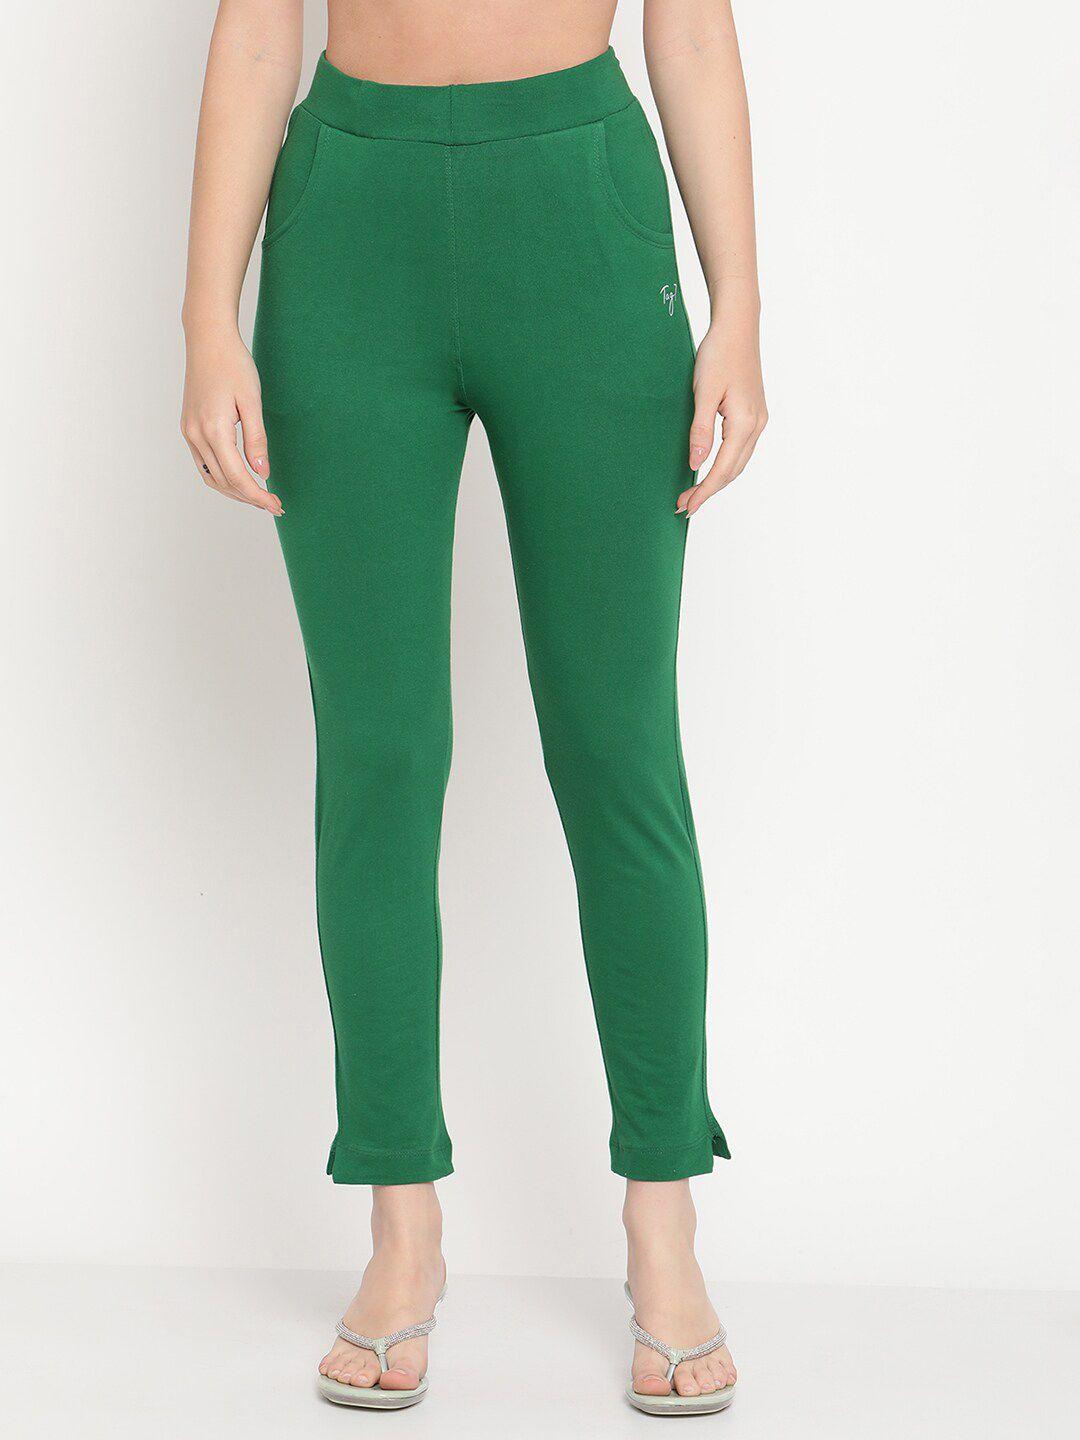 tag-7-women-green-solid-jeggings